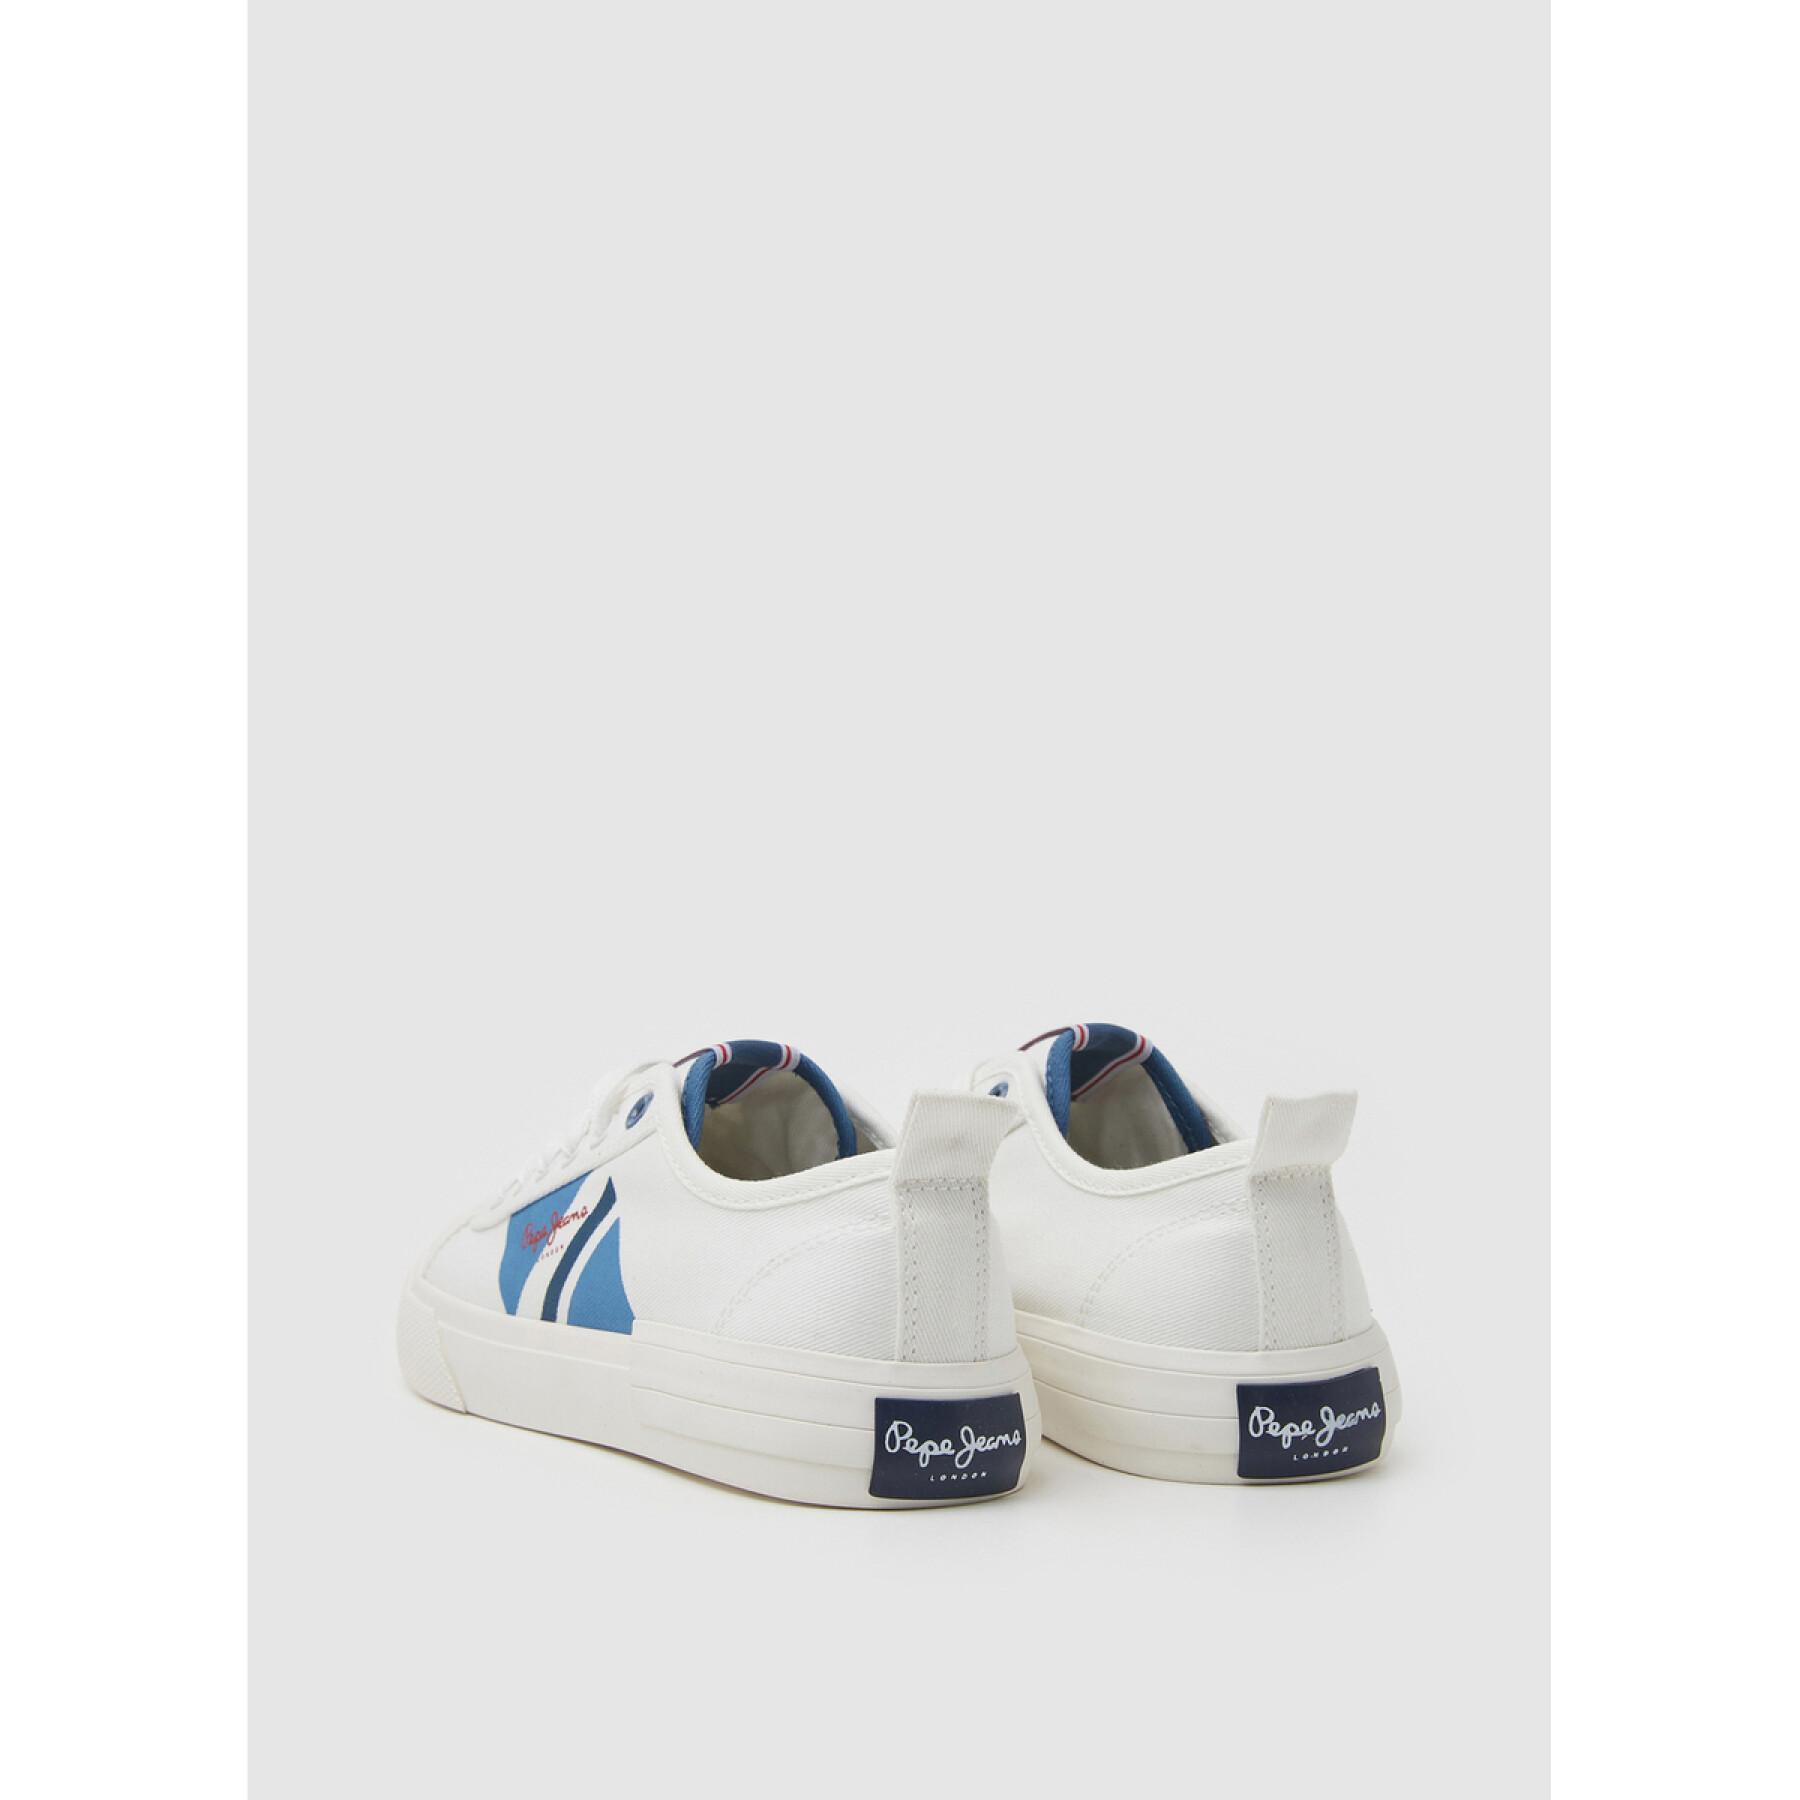 Sneakers Pepe Jeans Allen Flag Color